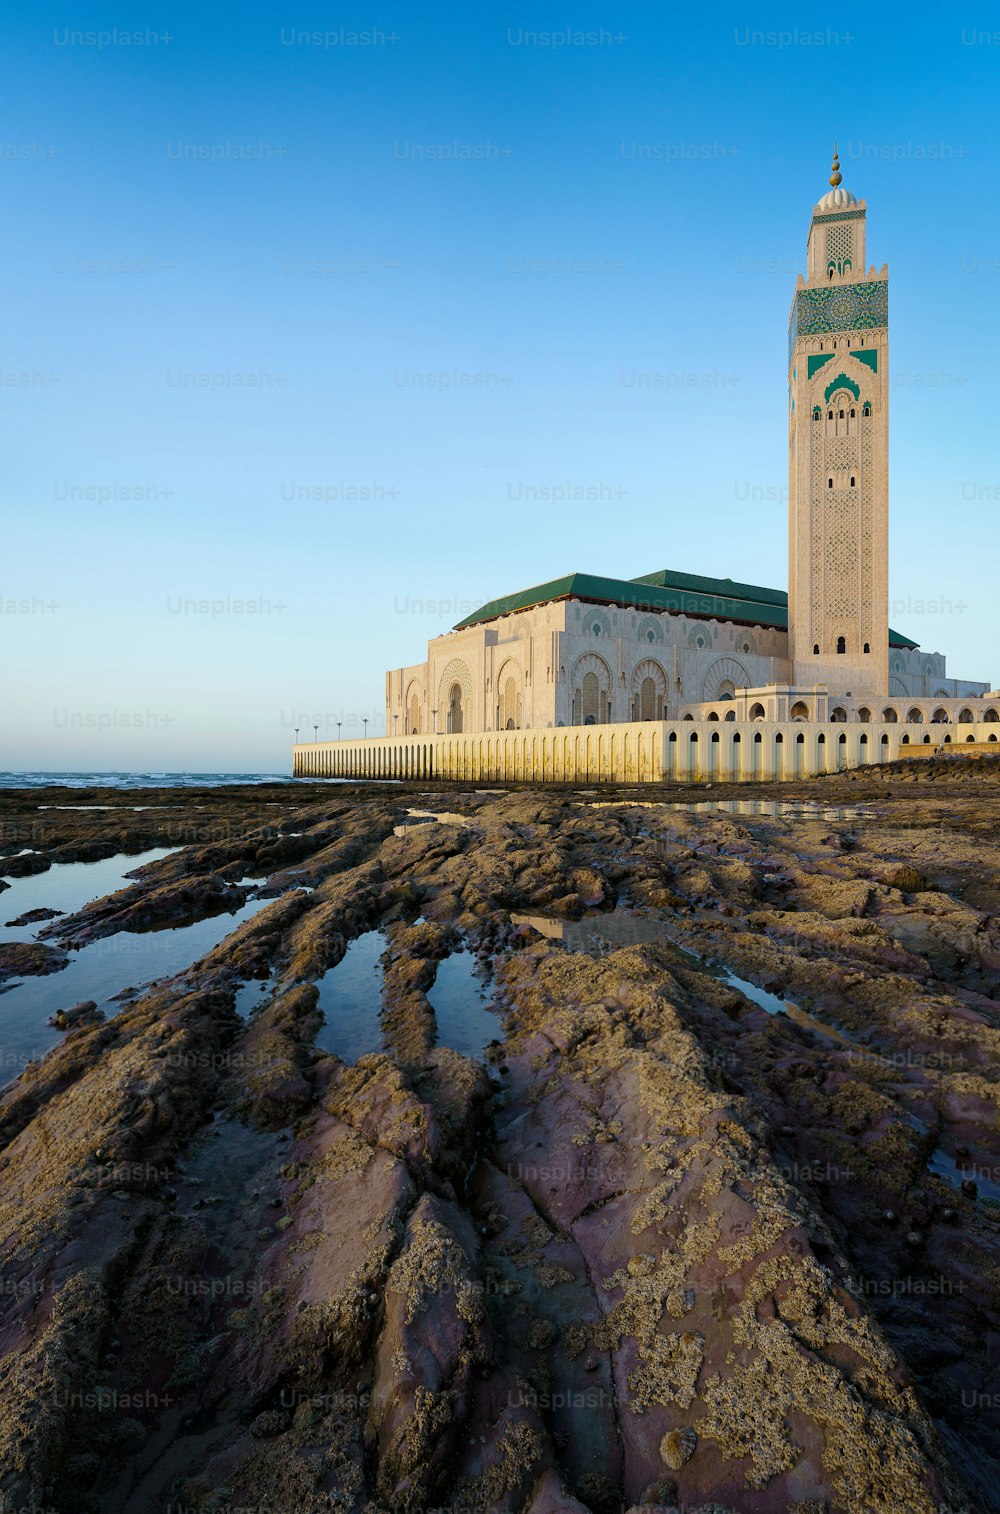 The beautiful Hassan II Mosque with rocks and water in the foreground in Casablanca, Morocco